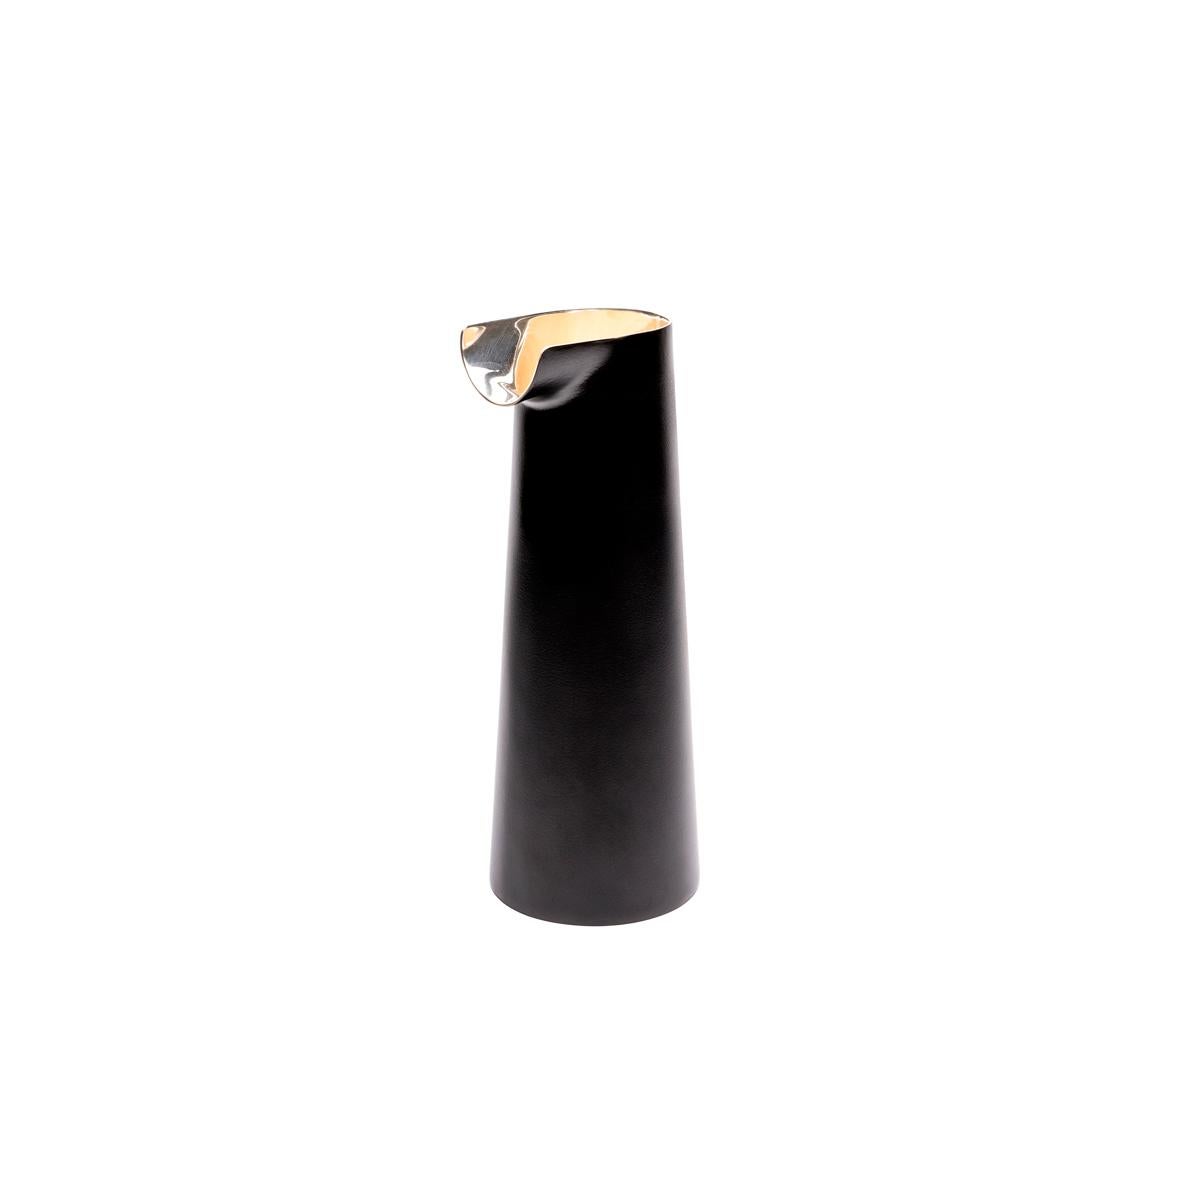 Tube is a silver plated jug available in two different finishes: only silver-plated metal, or silver plated metal with a black external finishing. This item was designed by the Italian designer duo Zaven, who took their inspiration from a small